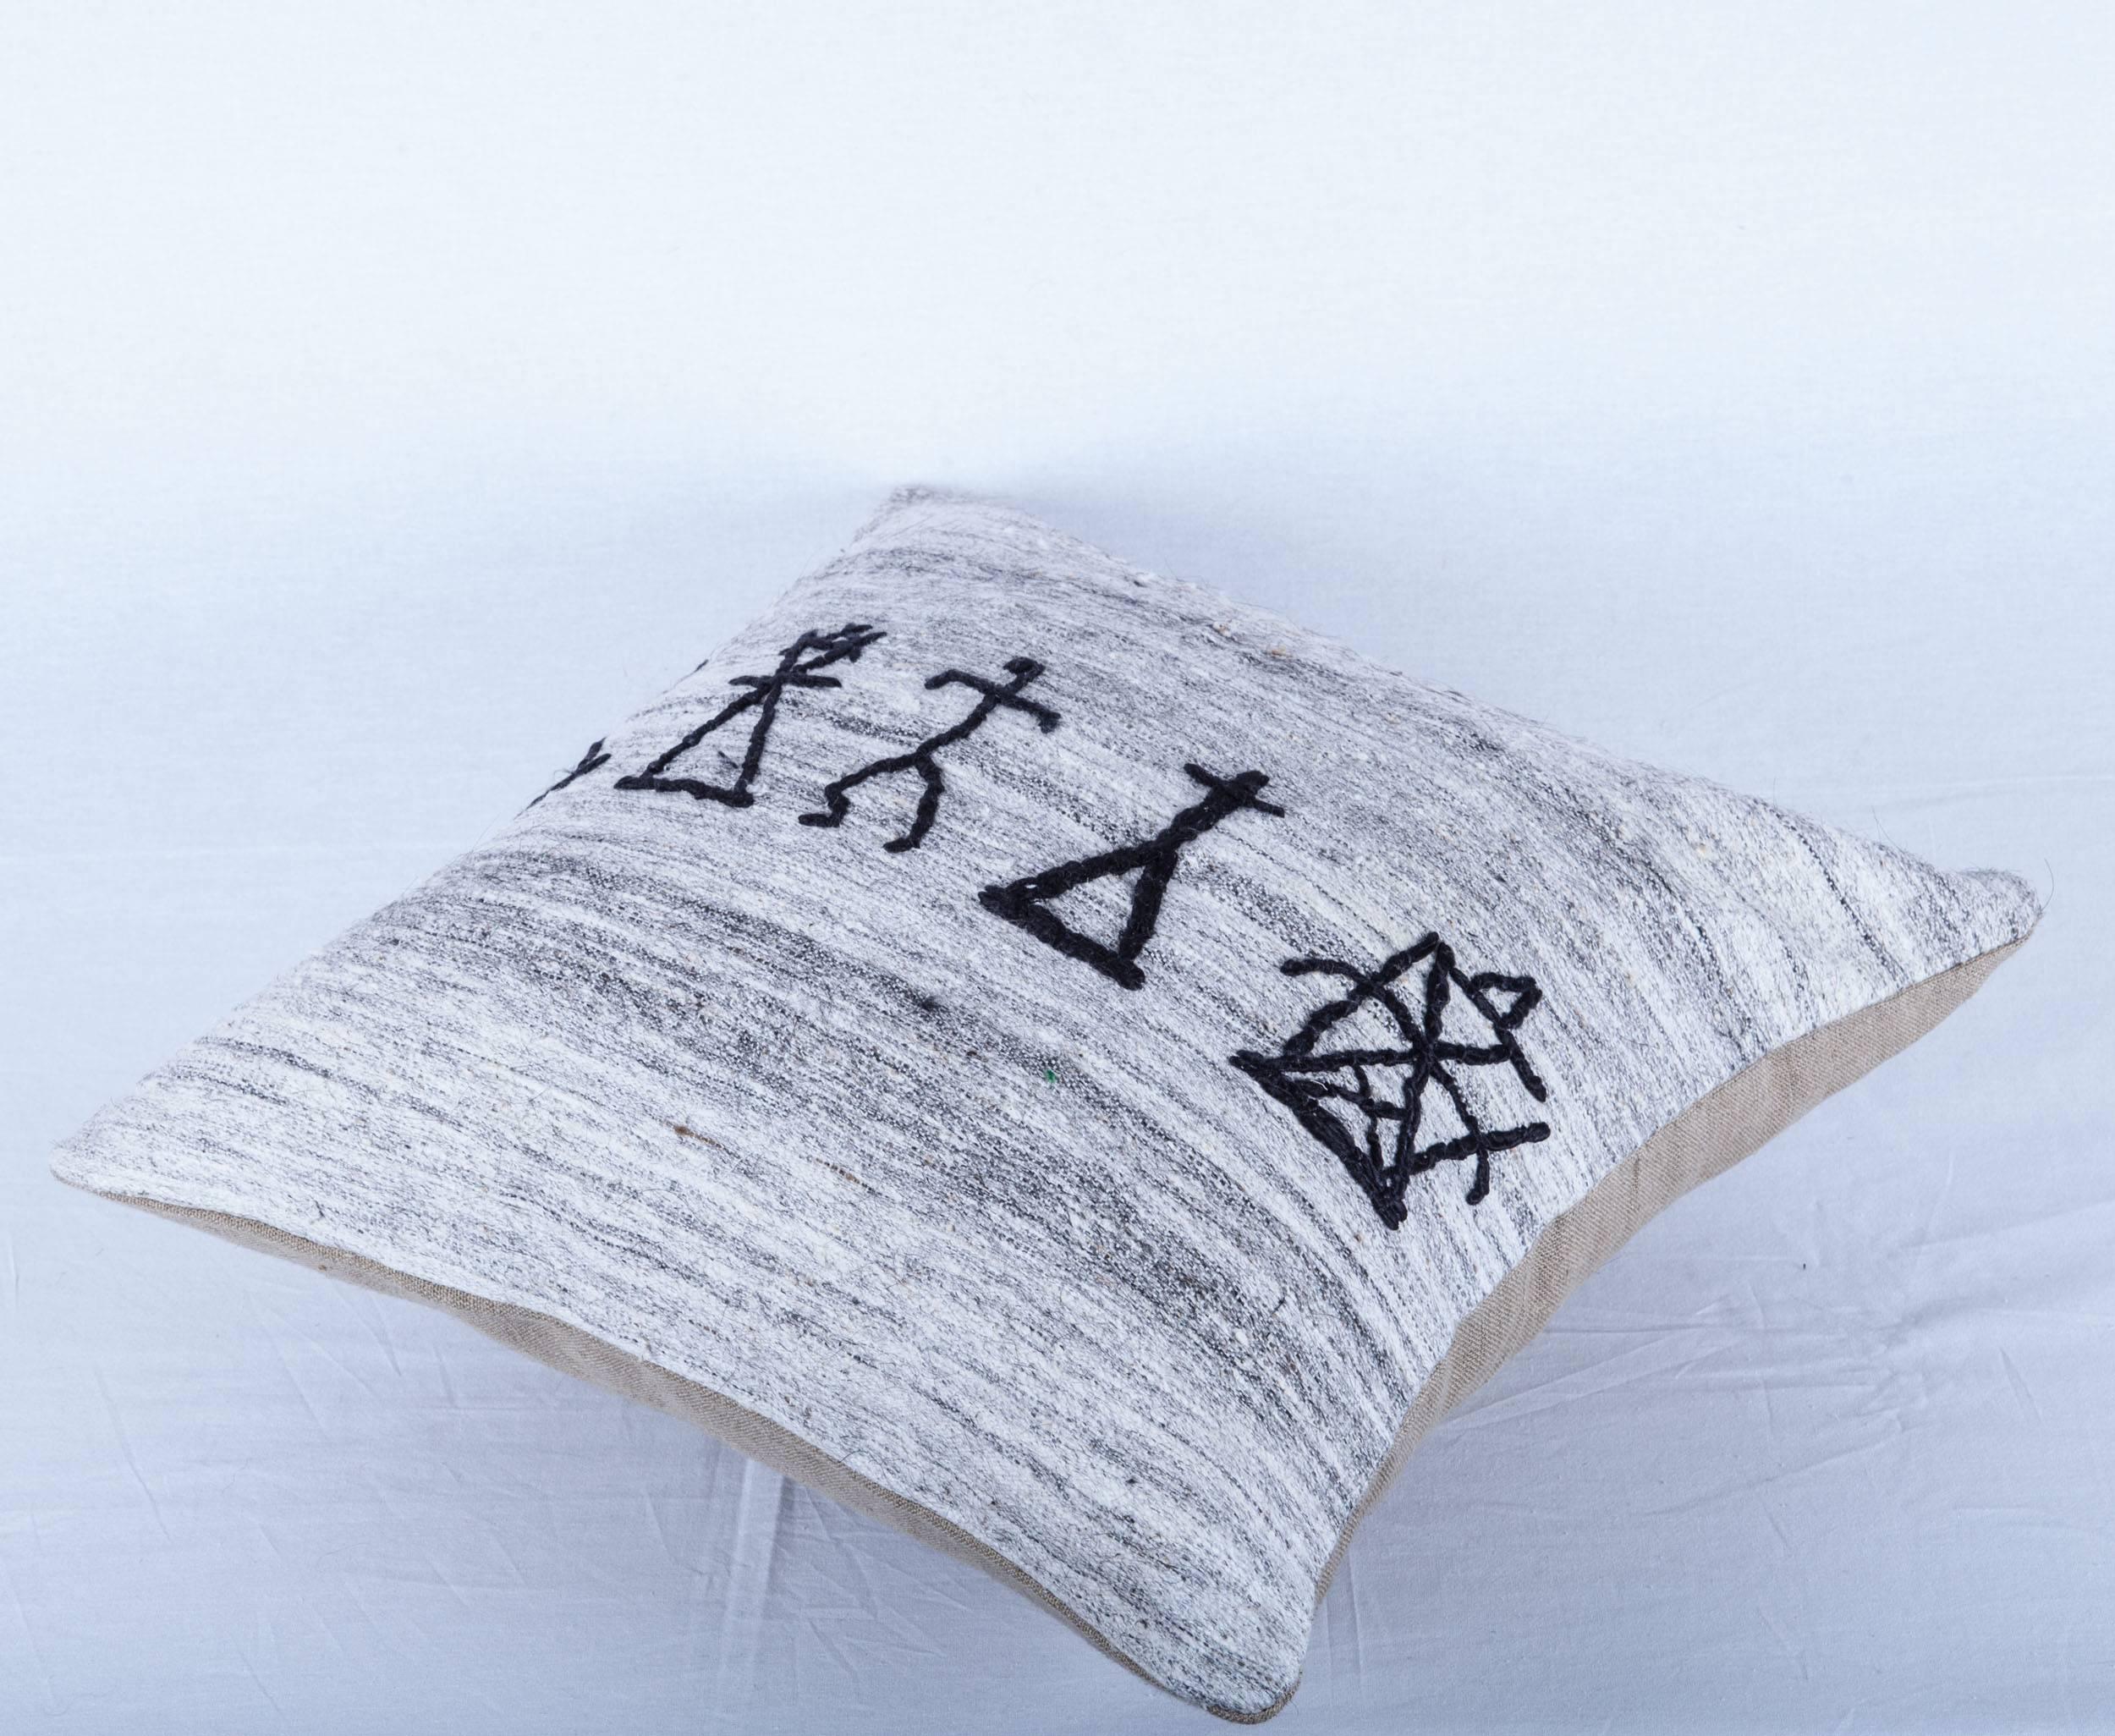 Contemporary Pillow with a New Design on a Vintage Anatolian Nomadic Kilim, by Seref Ozen